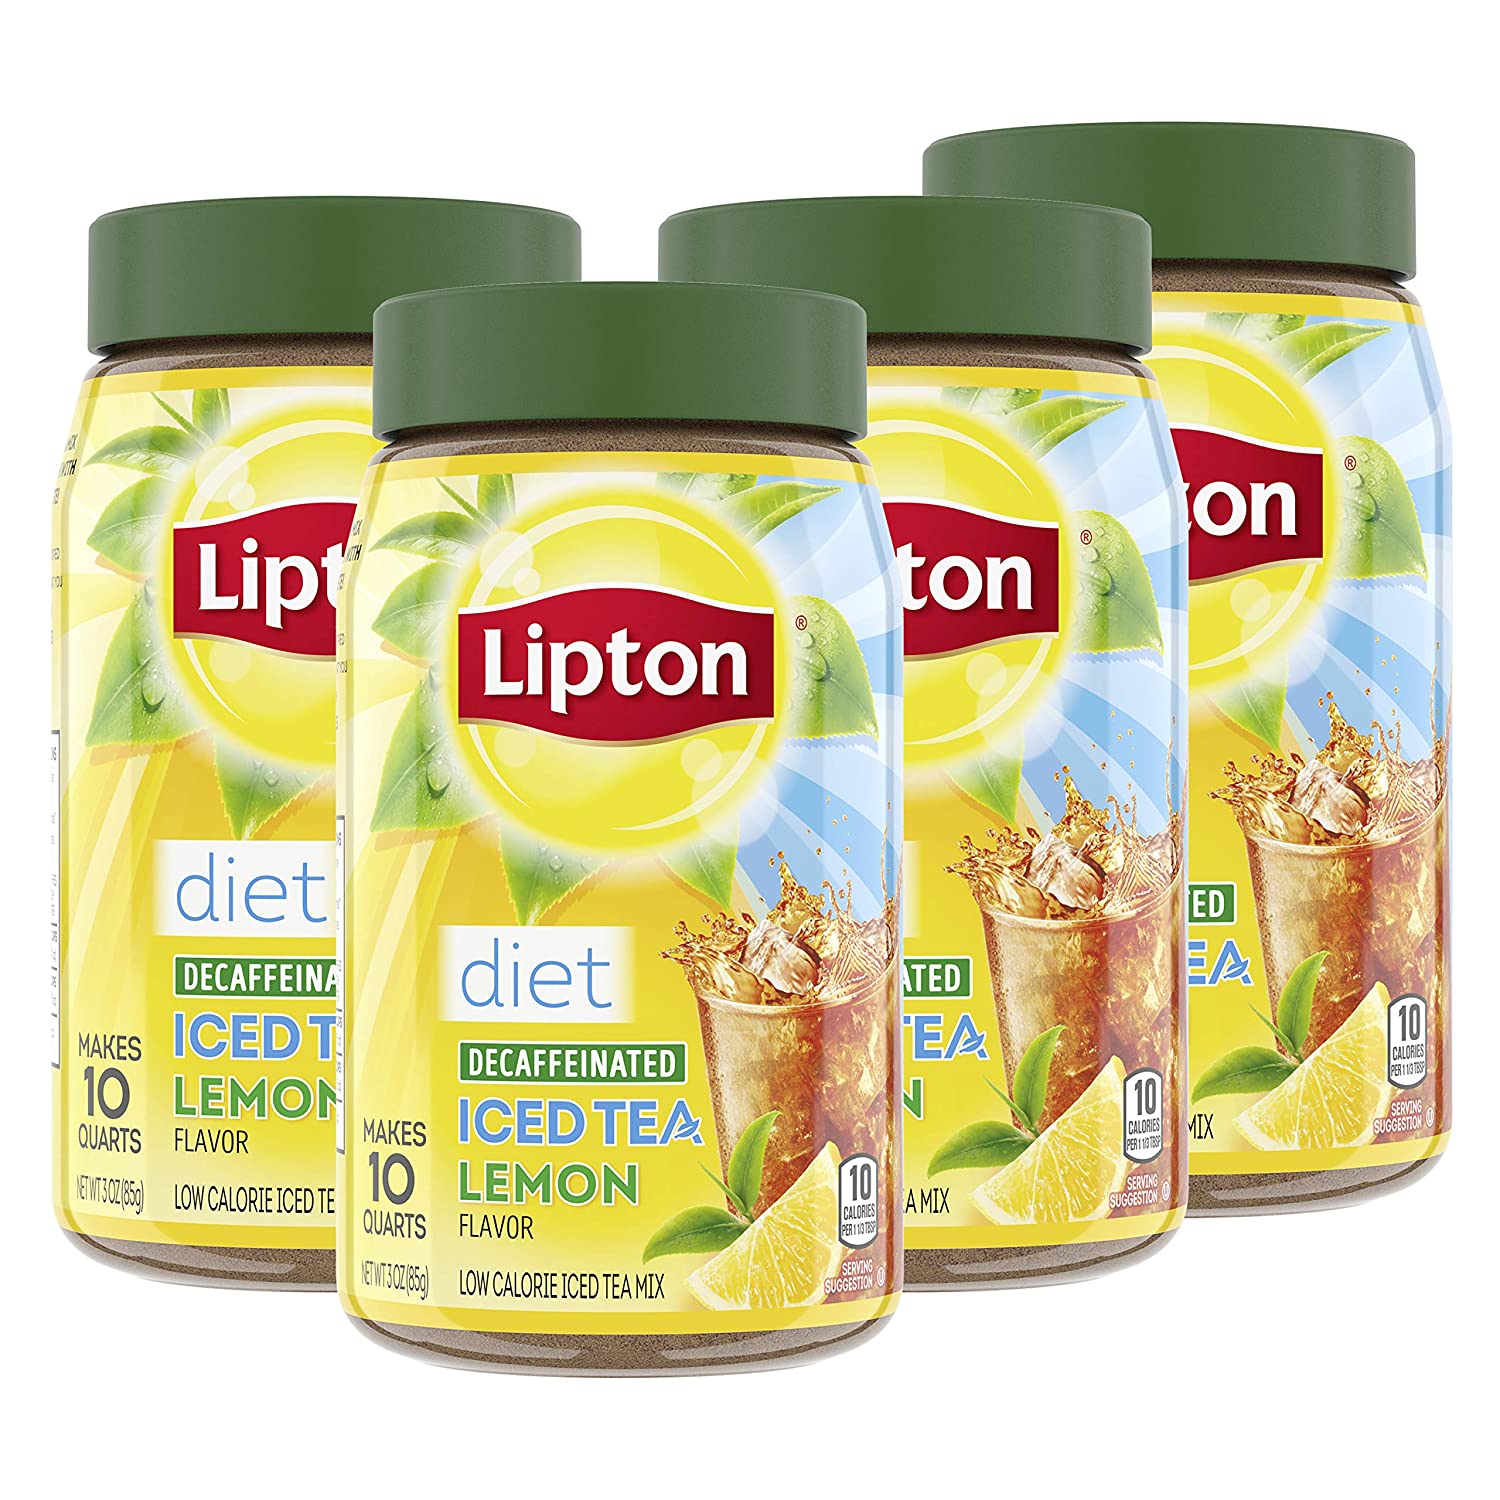 Lipton Iced Tea, Sweet, K-Cup Pods - 24 pack, 0.58 oz pods